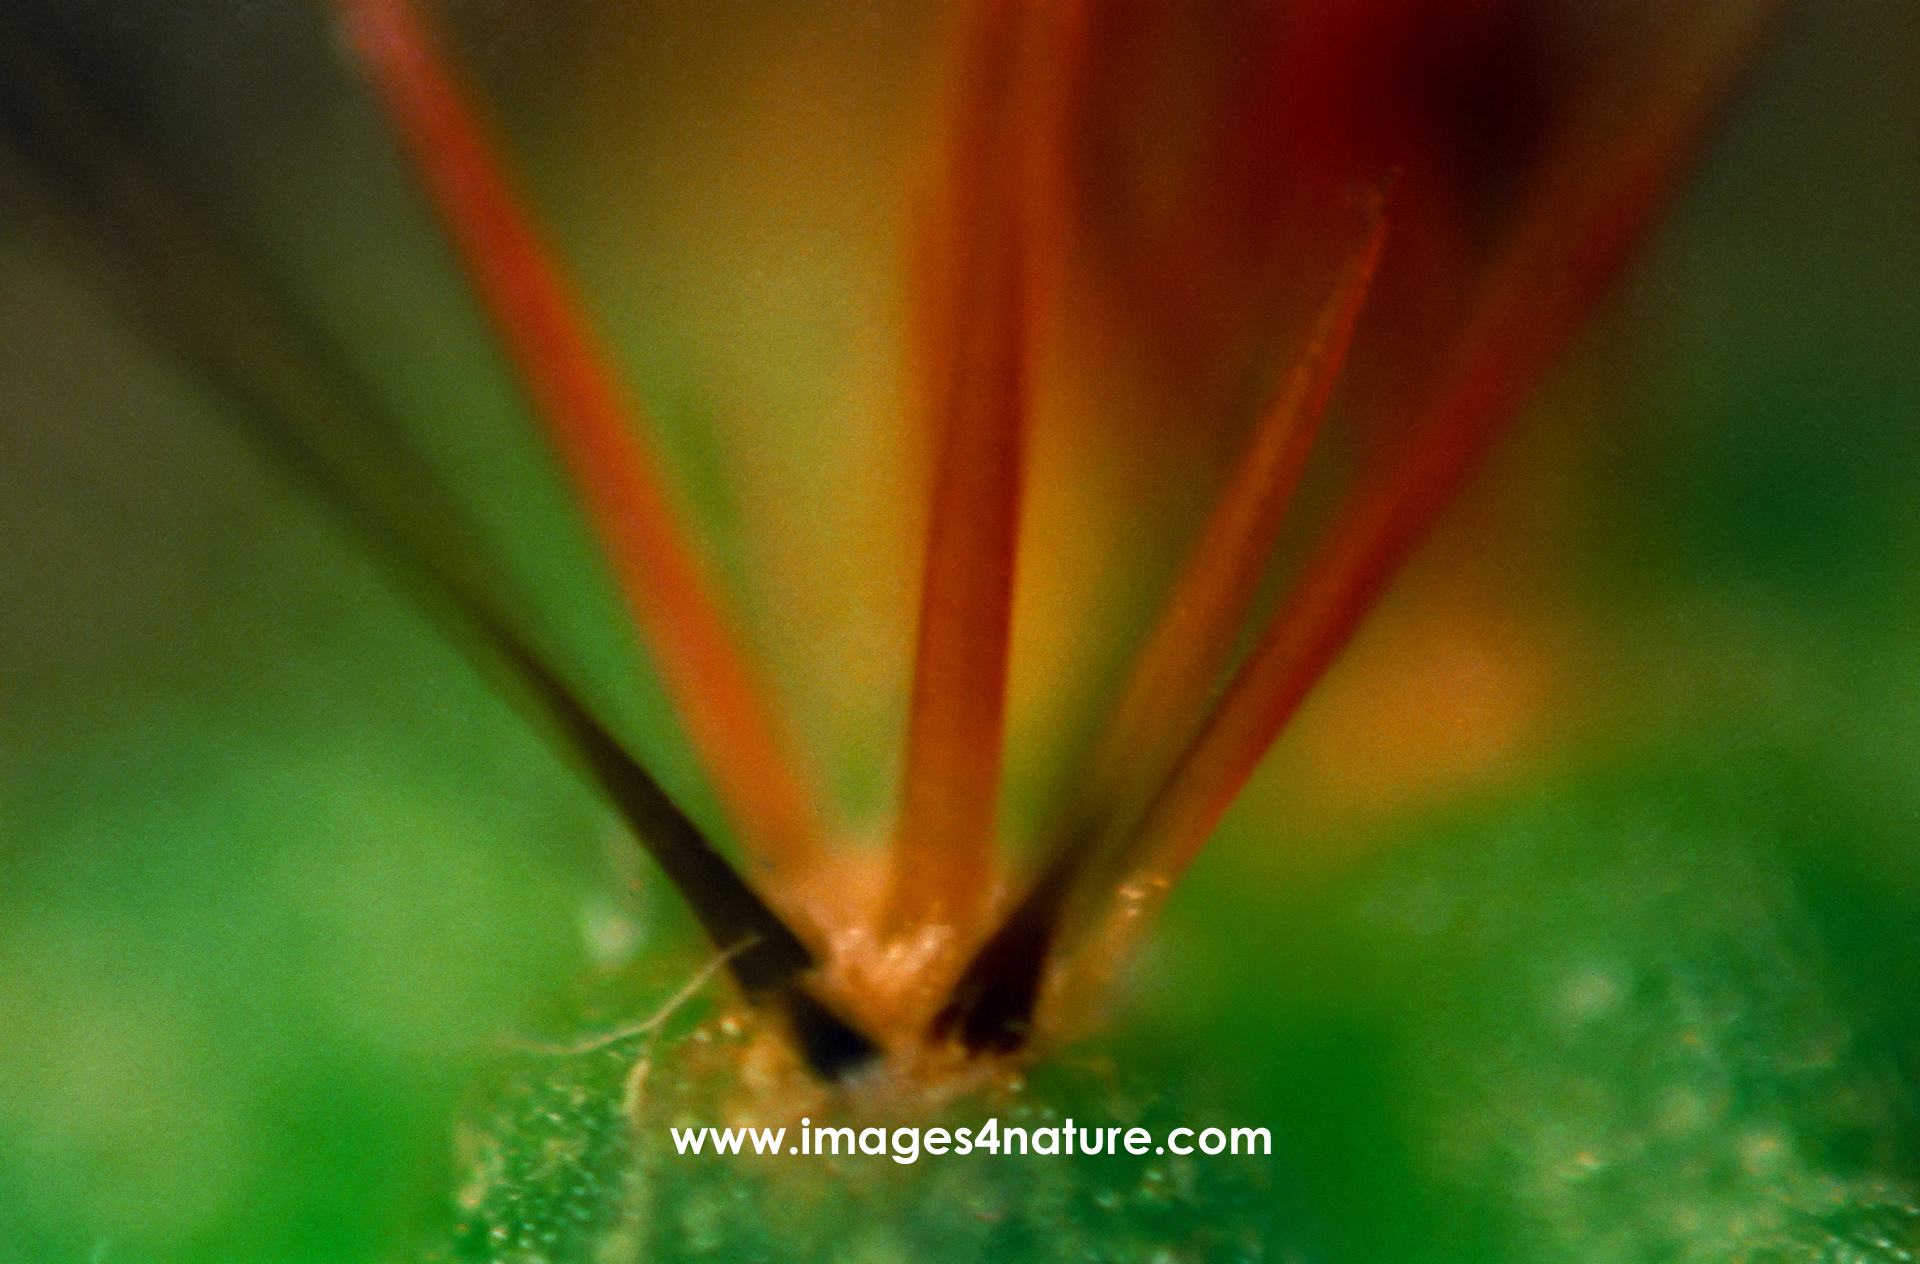 Macro of red spines on green cactus